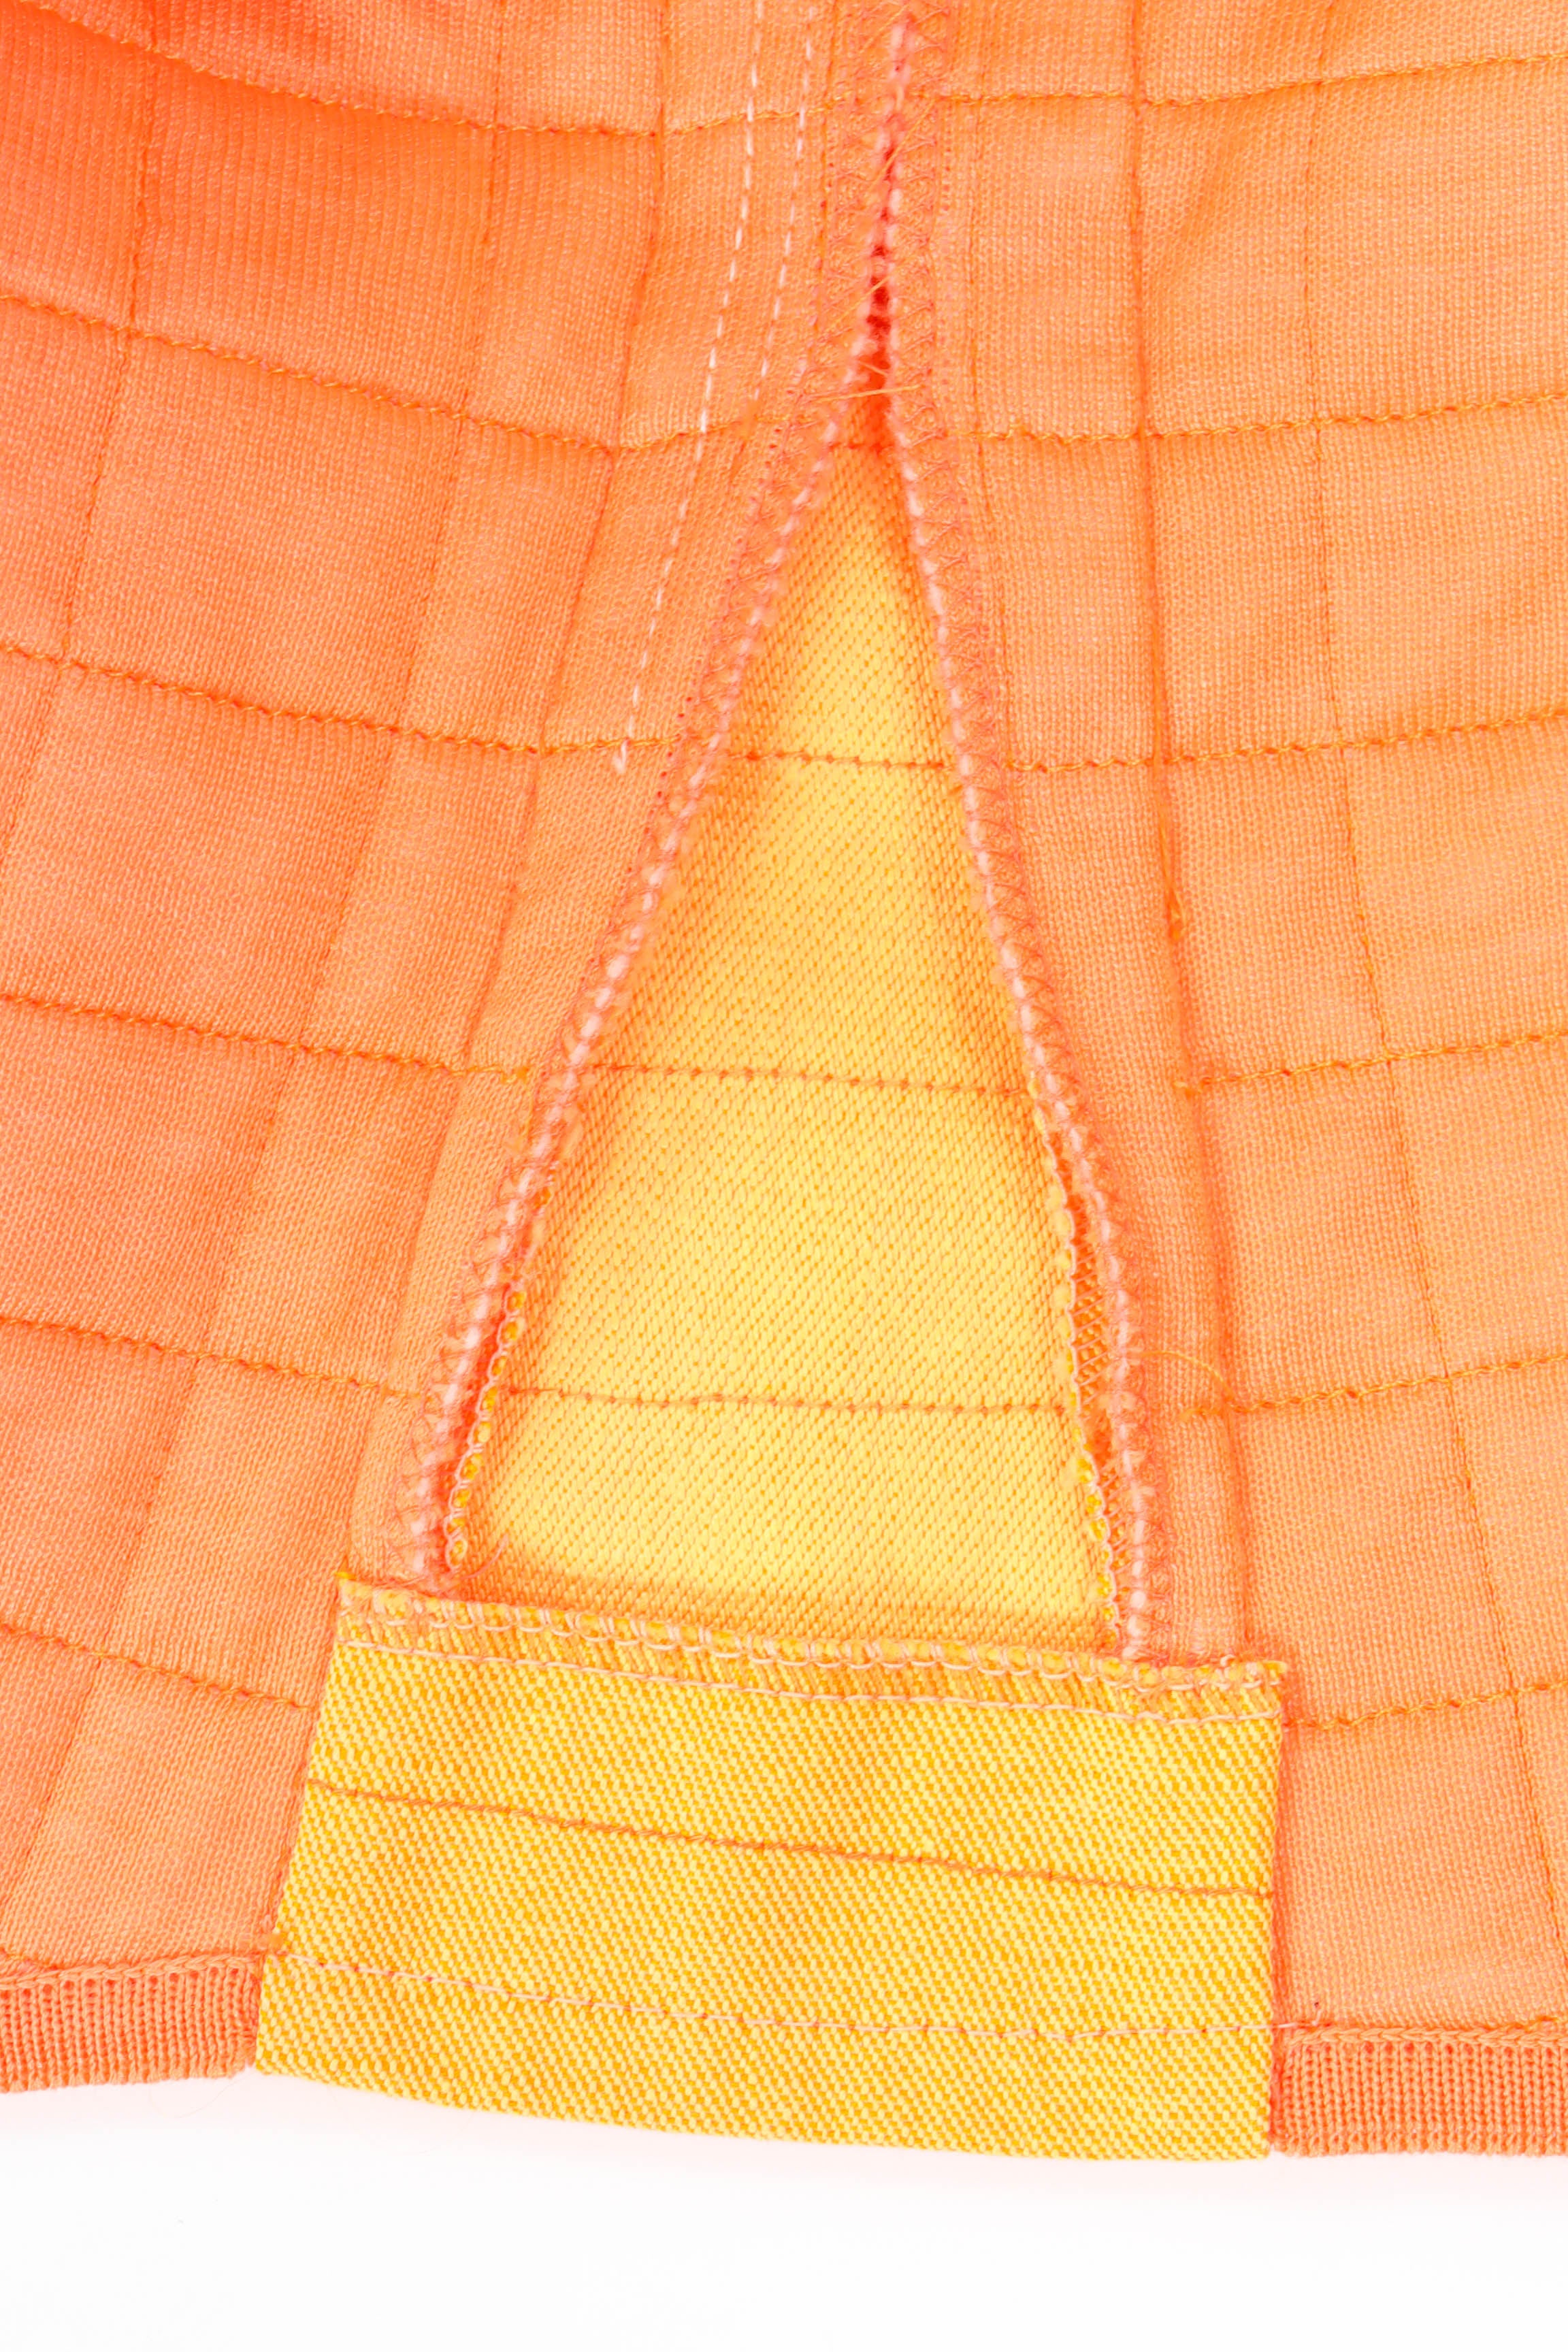 Vintage Chanel Quilted Tank Top side seam detail @ Recess Los Angeles